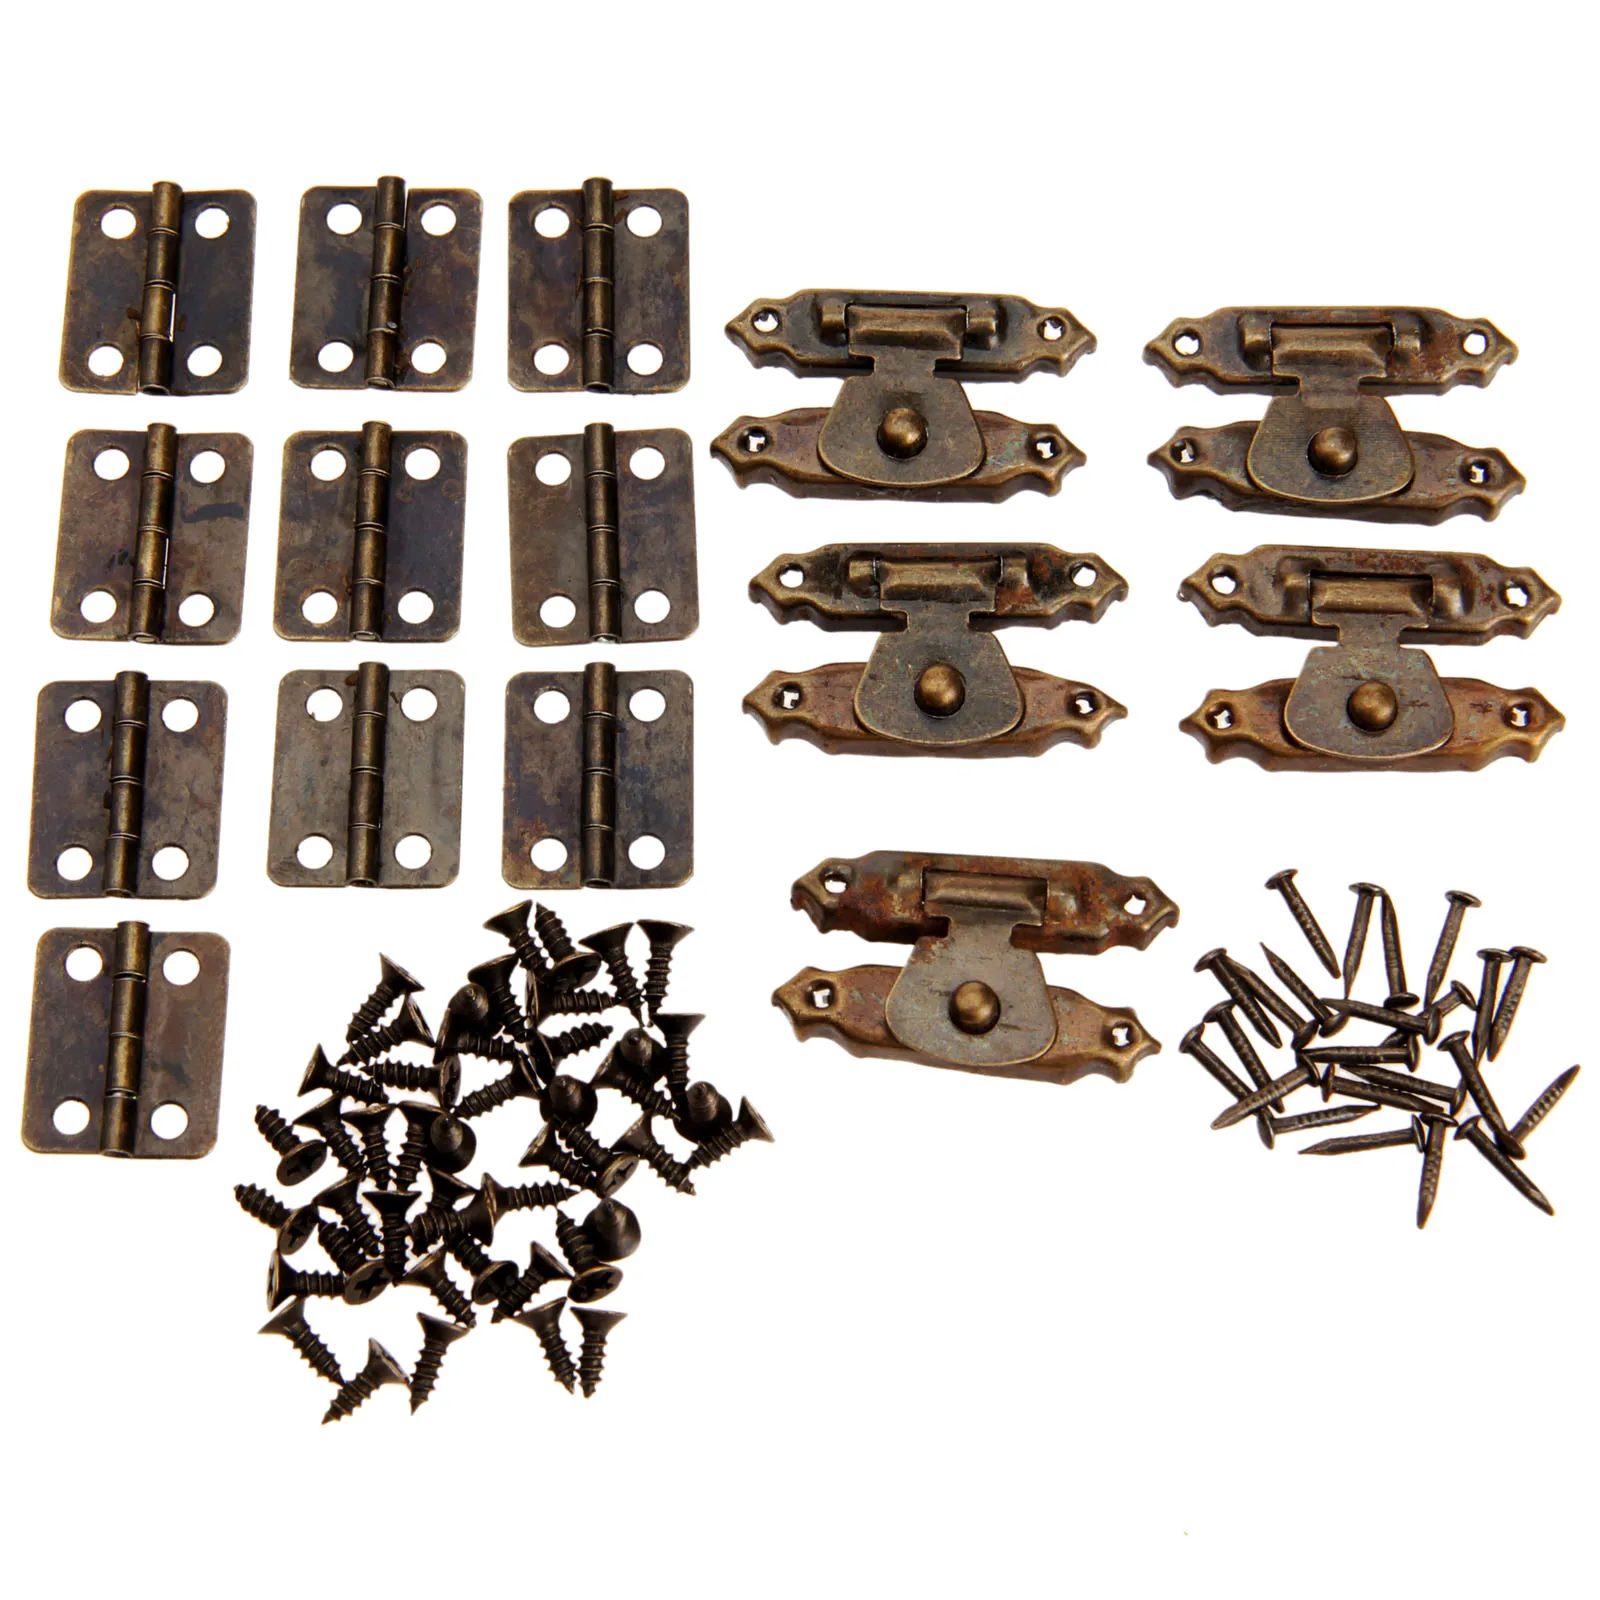 15Pcs/set Antique Bronze/Gold Furniture Cabinet Hinges withJewelry Wooden Box Case Toggle Hasp Latch Iron Vintage Hardware